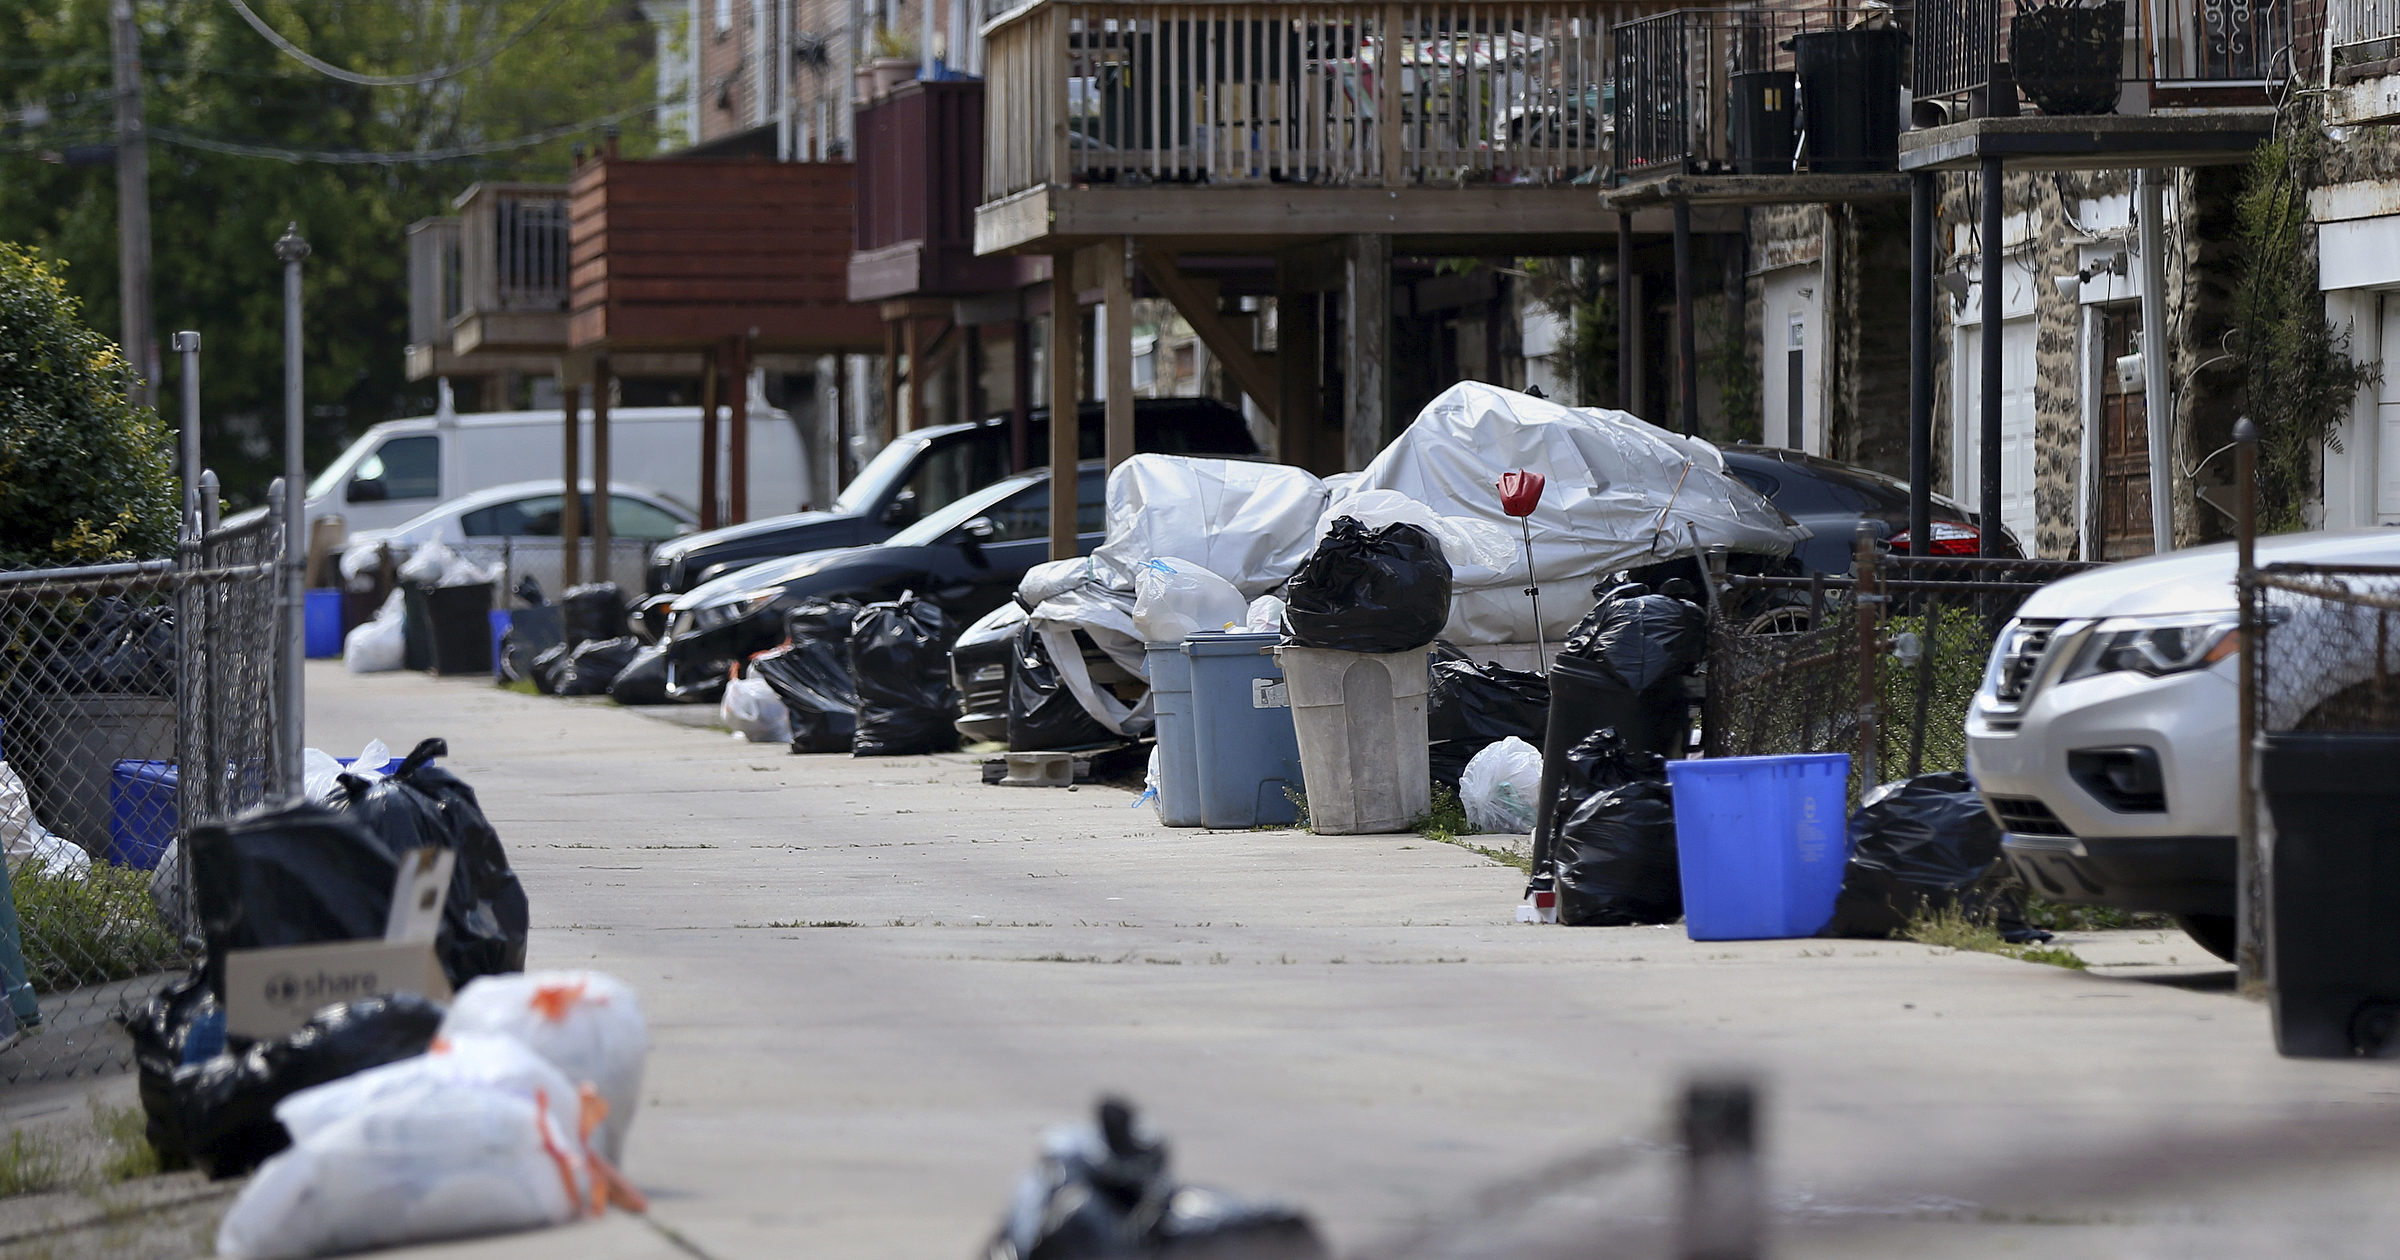 In this photo from May 13, 2020, bags of garbage sit along the street in Philadelphia's Ogontz section. Households are generating more trash as people stay home due to shutdown restrictions.